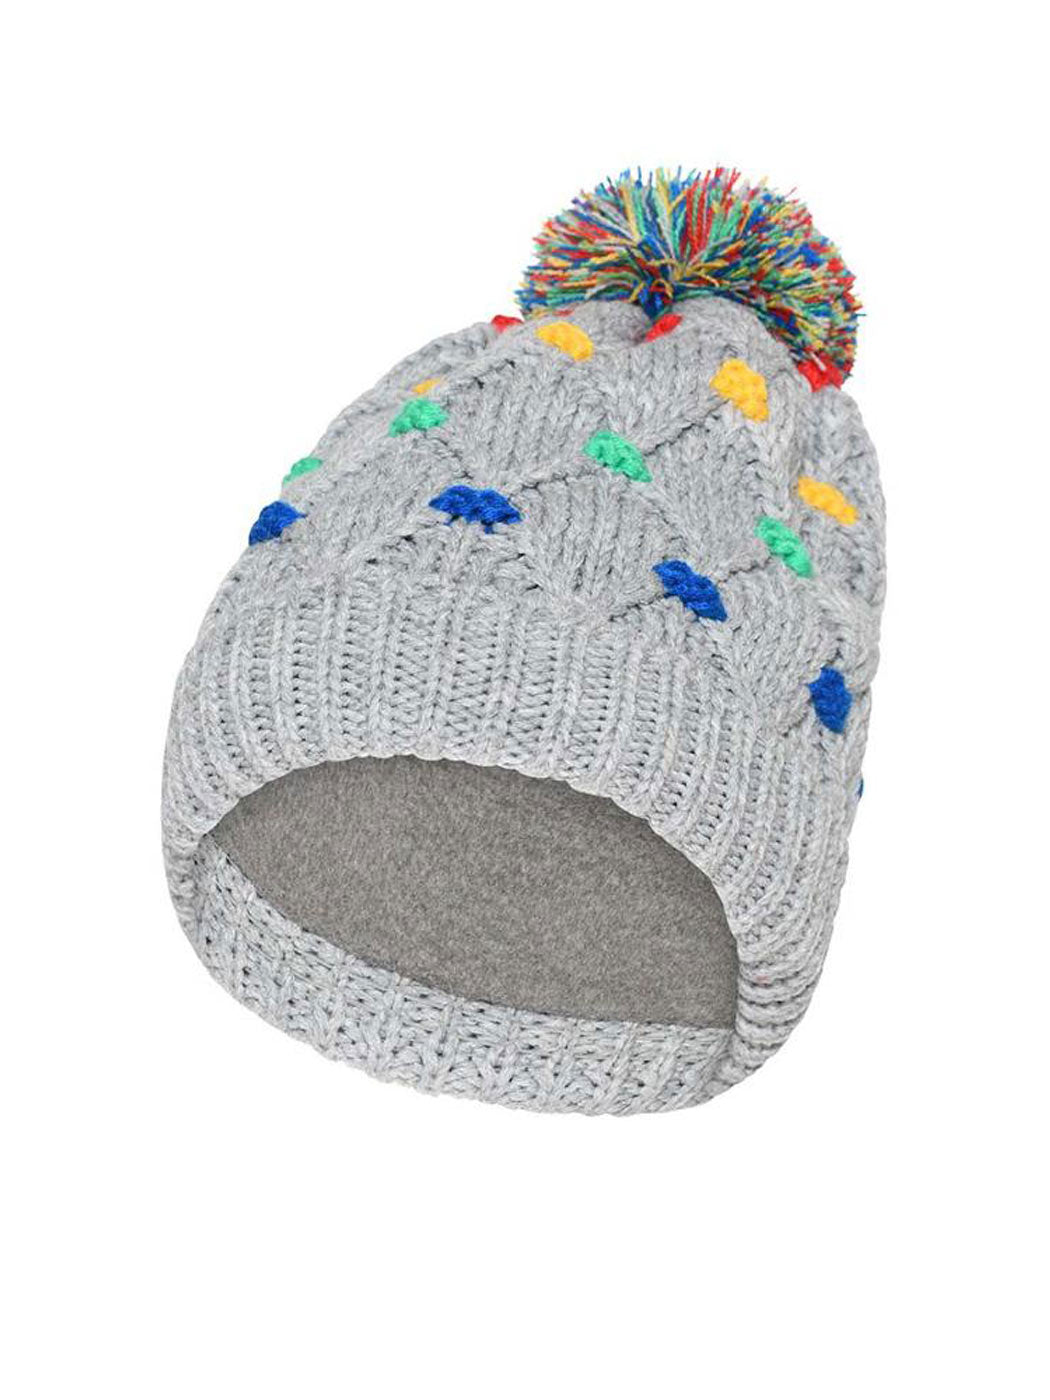 LEGO knitted hat for boys and girls LWALEX 712-921 Grey